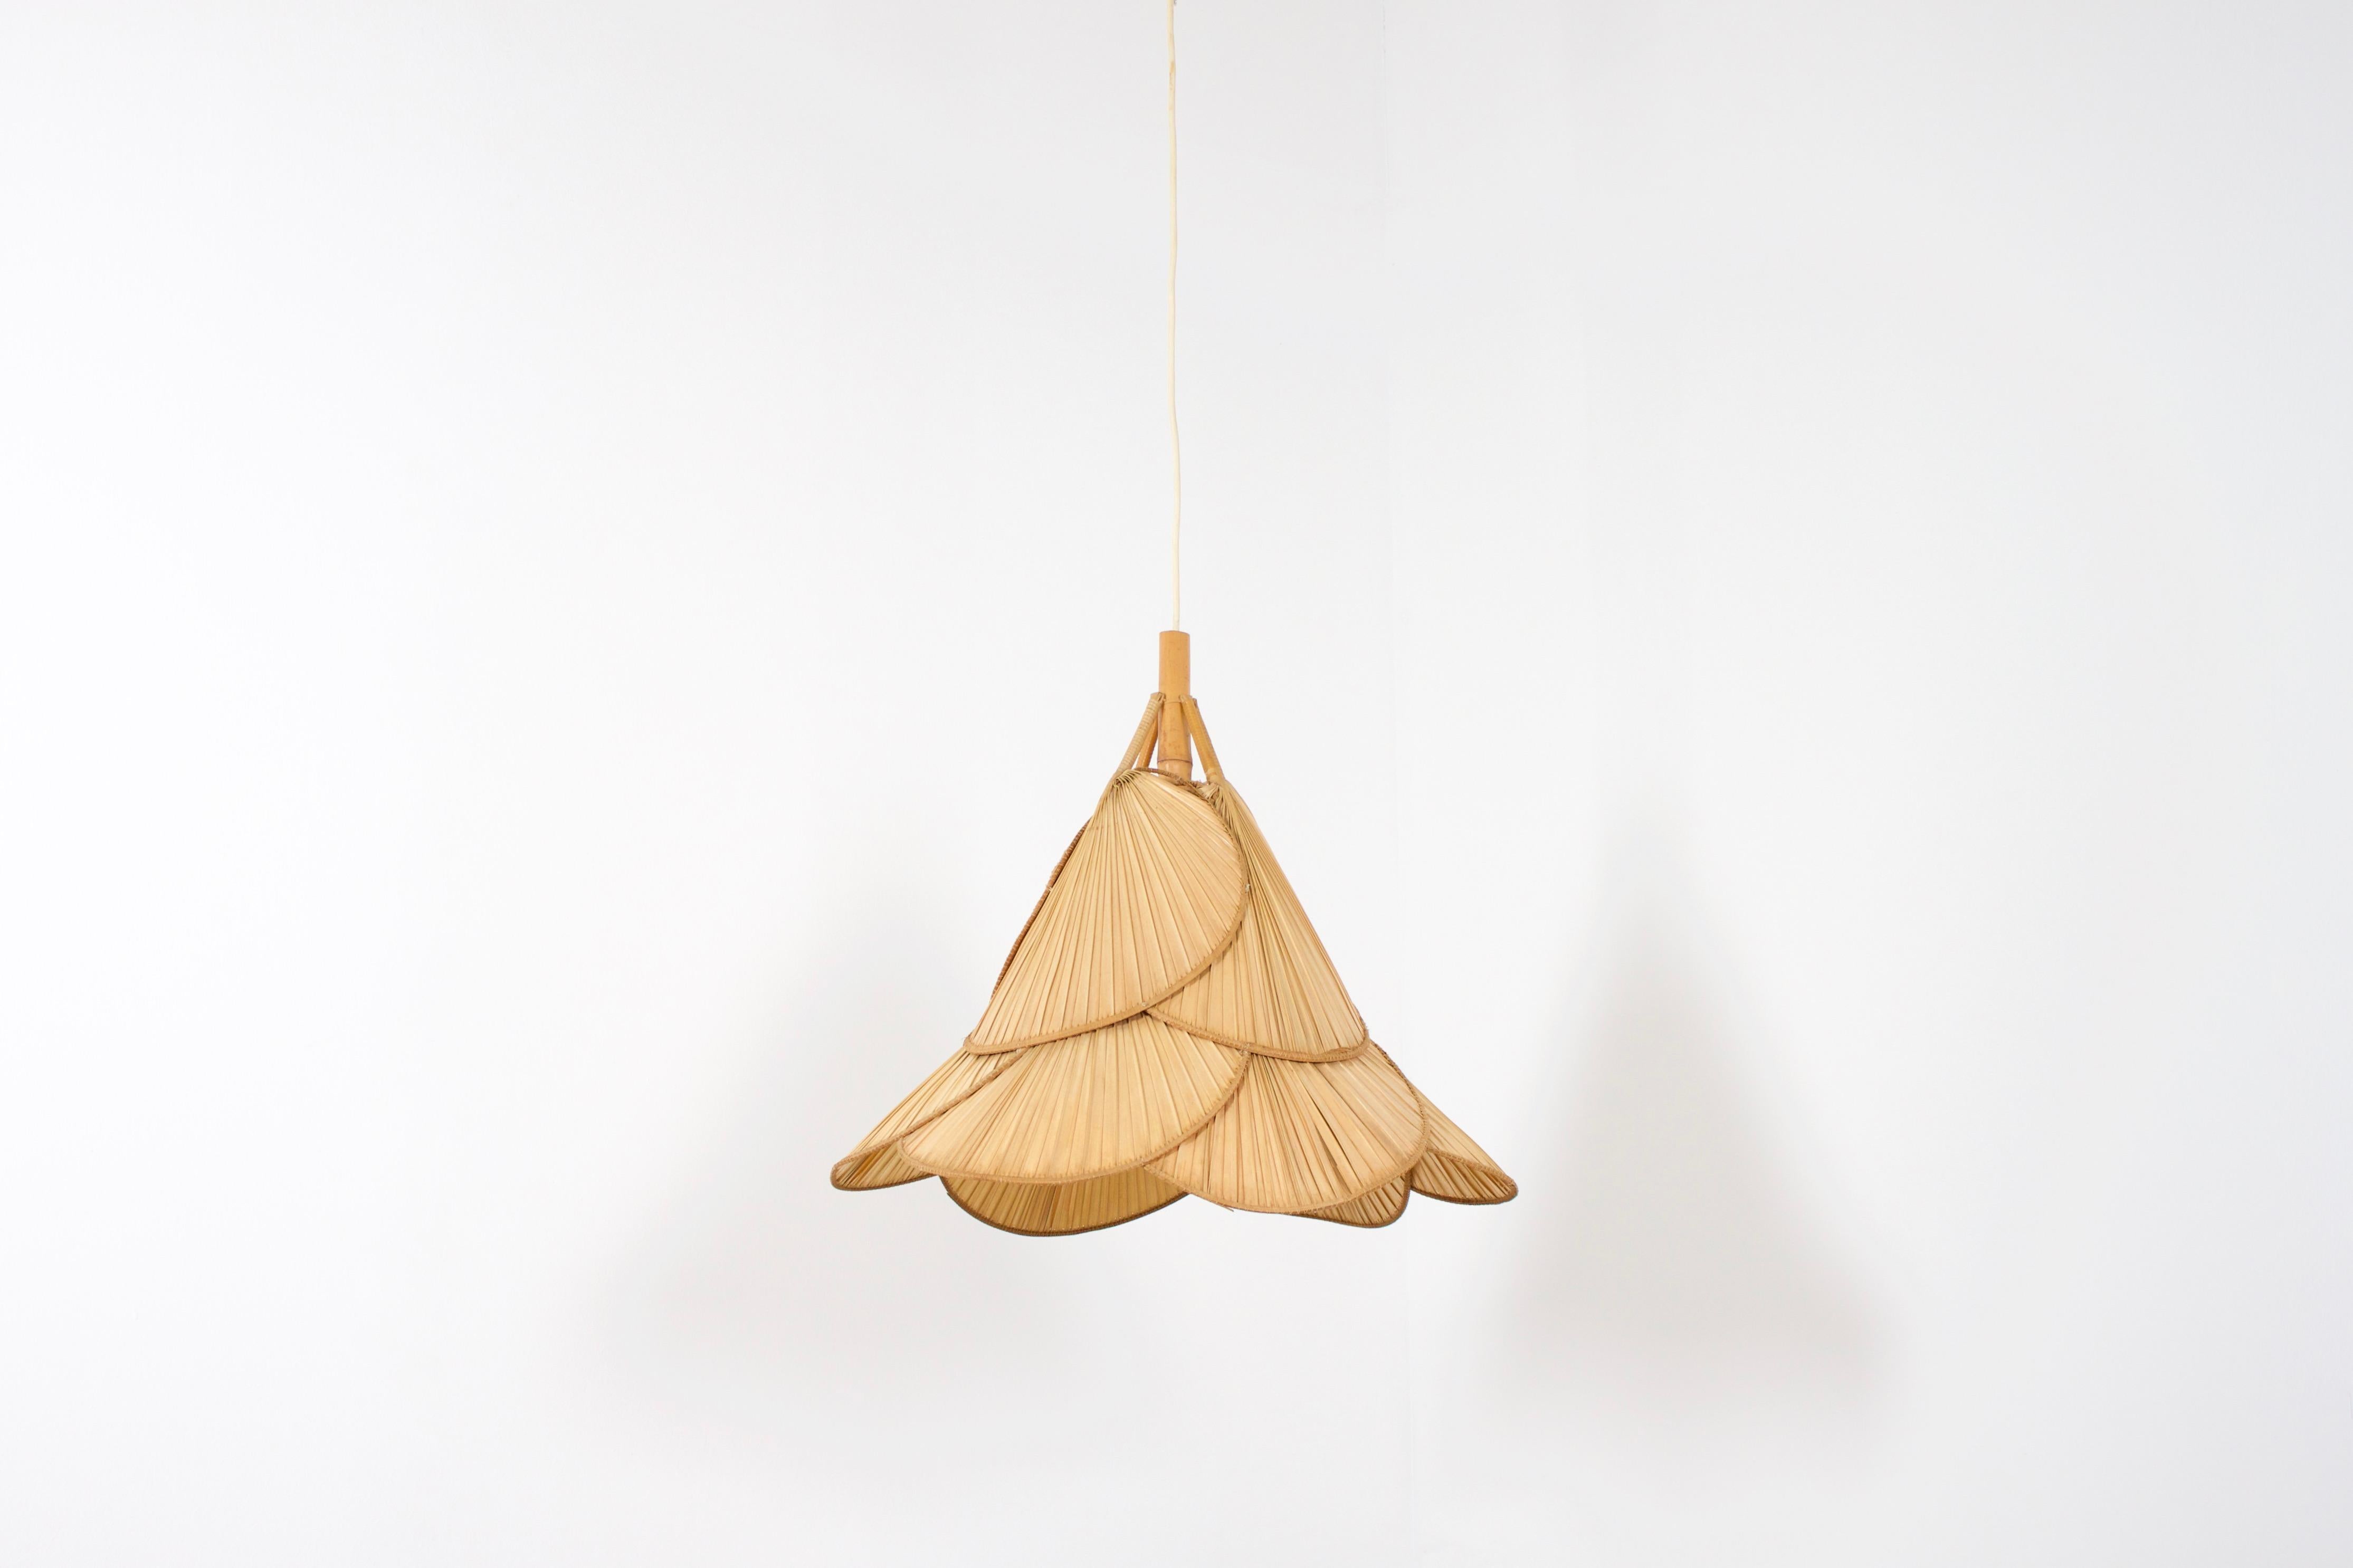 Small model Uchiwa chandelier in very good condition.

Designed by Ingo Maurer in the 1970s

Handmade from bamboo and paper, it hangs from one cable which gives a max drop of 3 meter. (longer cable on request)

The chandelier consists of